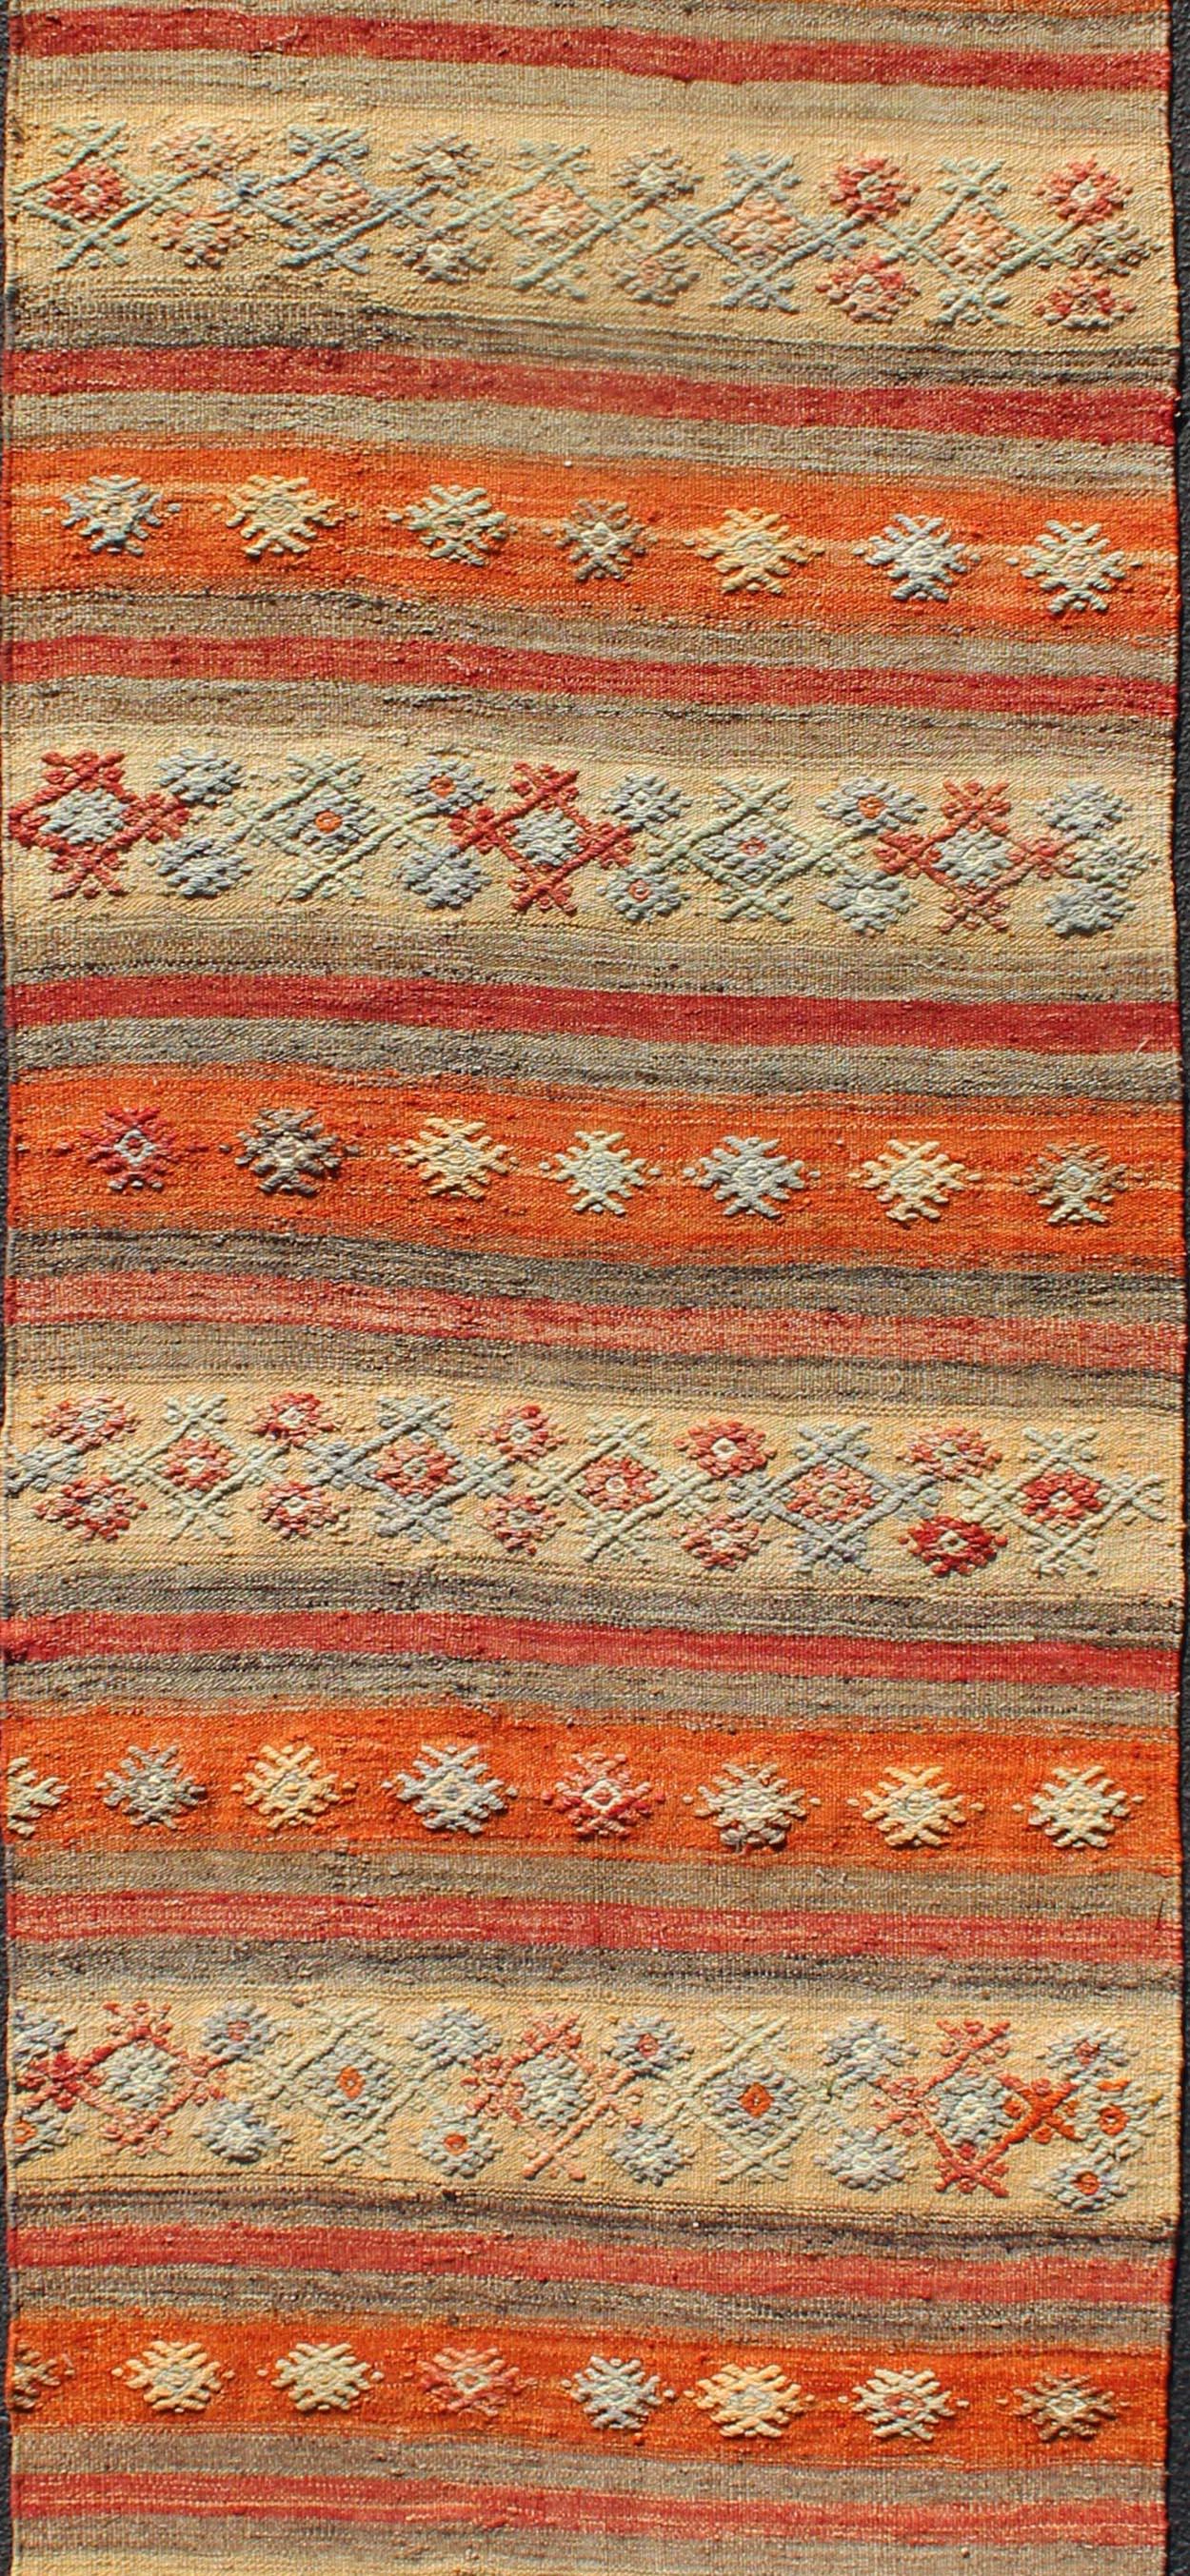 Colorful Vintage Turkish Kilim Runner with Stripes and Geometric Embroideries In Good Condition For Sale In Atlanta, GA